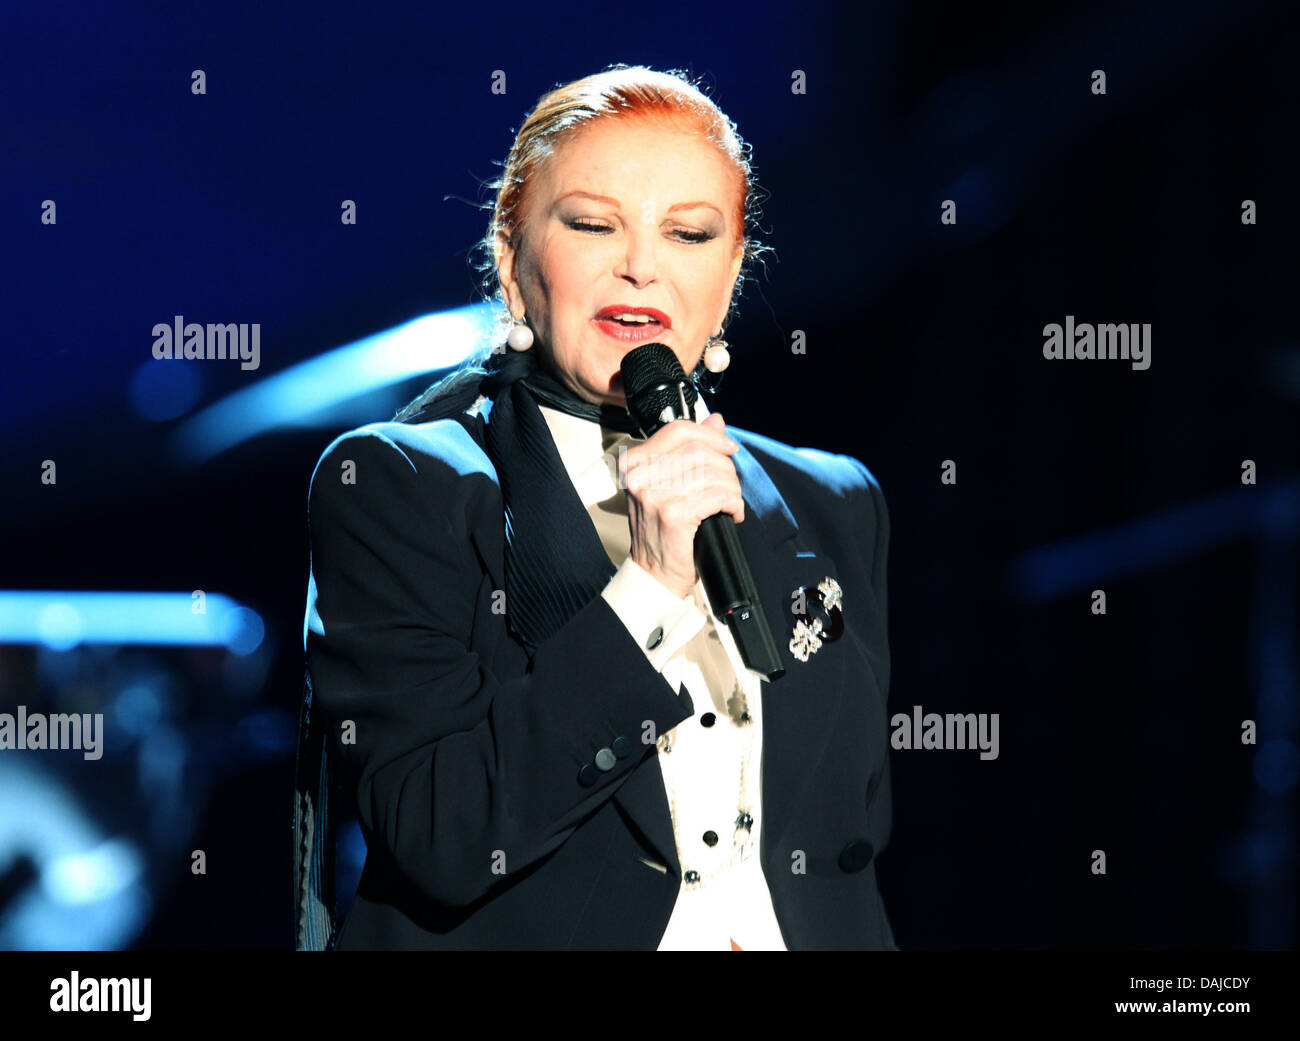 Italian singer Milva performs during the German television show 'Willkommen bei Carmen Nebel' ('Welcome to Carmen Nebel's show') aired by the German public tv broadcaster ZDF in Klagenfurt, Austria, 2 April 2011. Numerous German and international stars perform at popular German variety and entertainment show. Photo:  Stock Photo